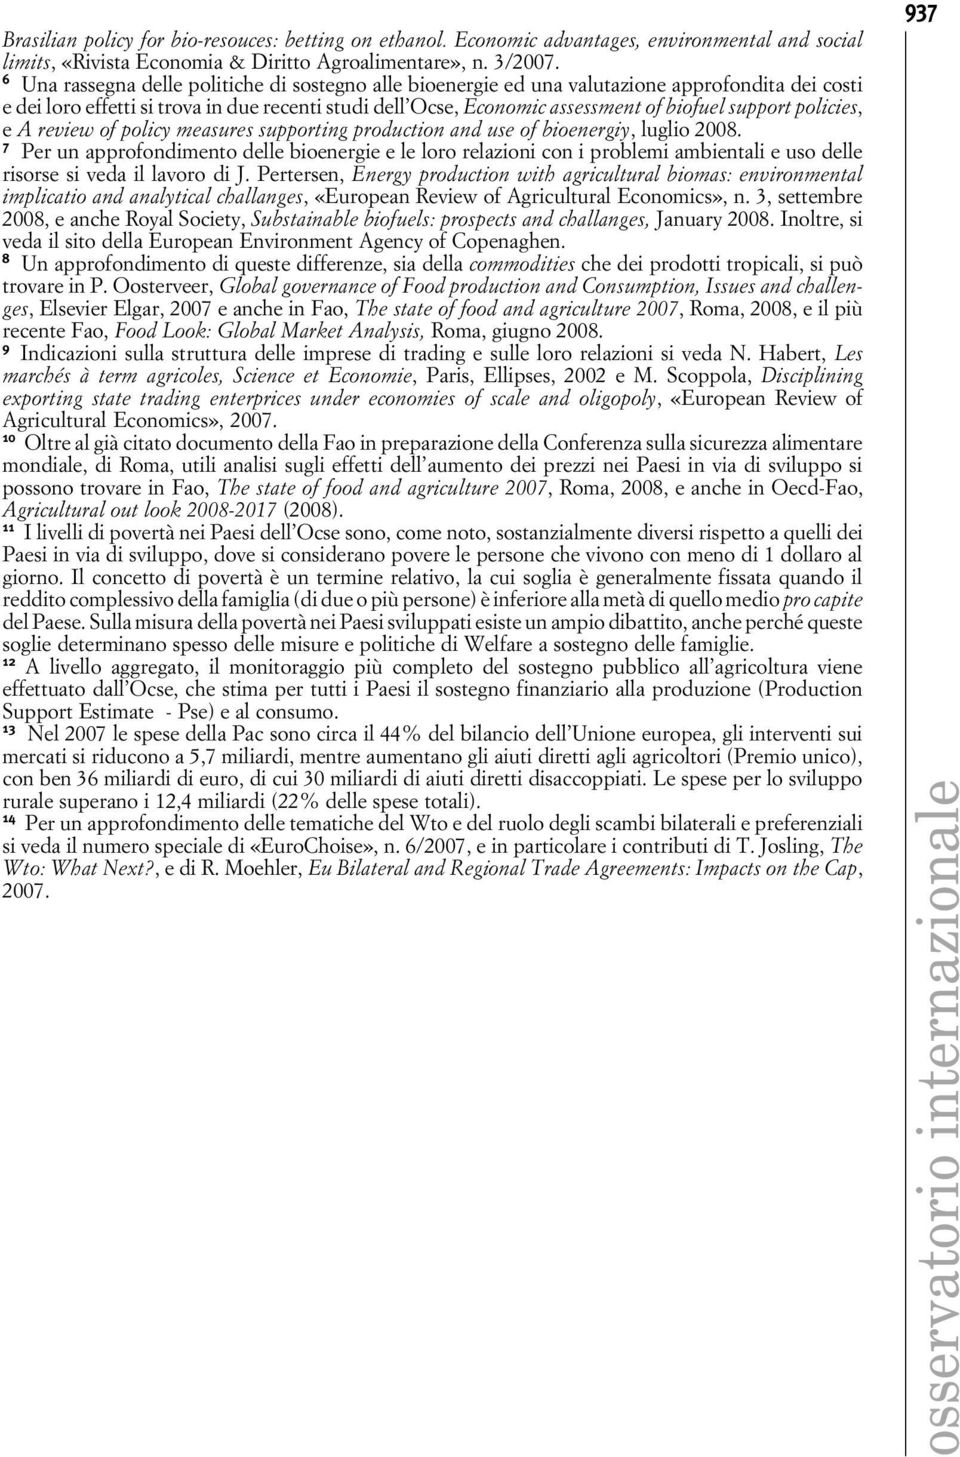 policies, e A review of policy measures supporting production and use of bioenergiy, luglio 2008.